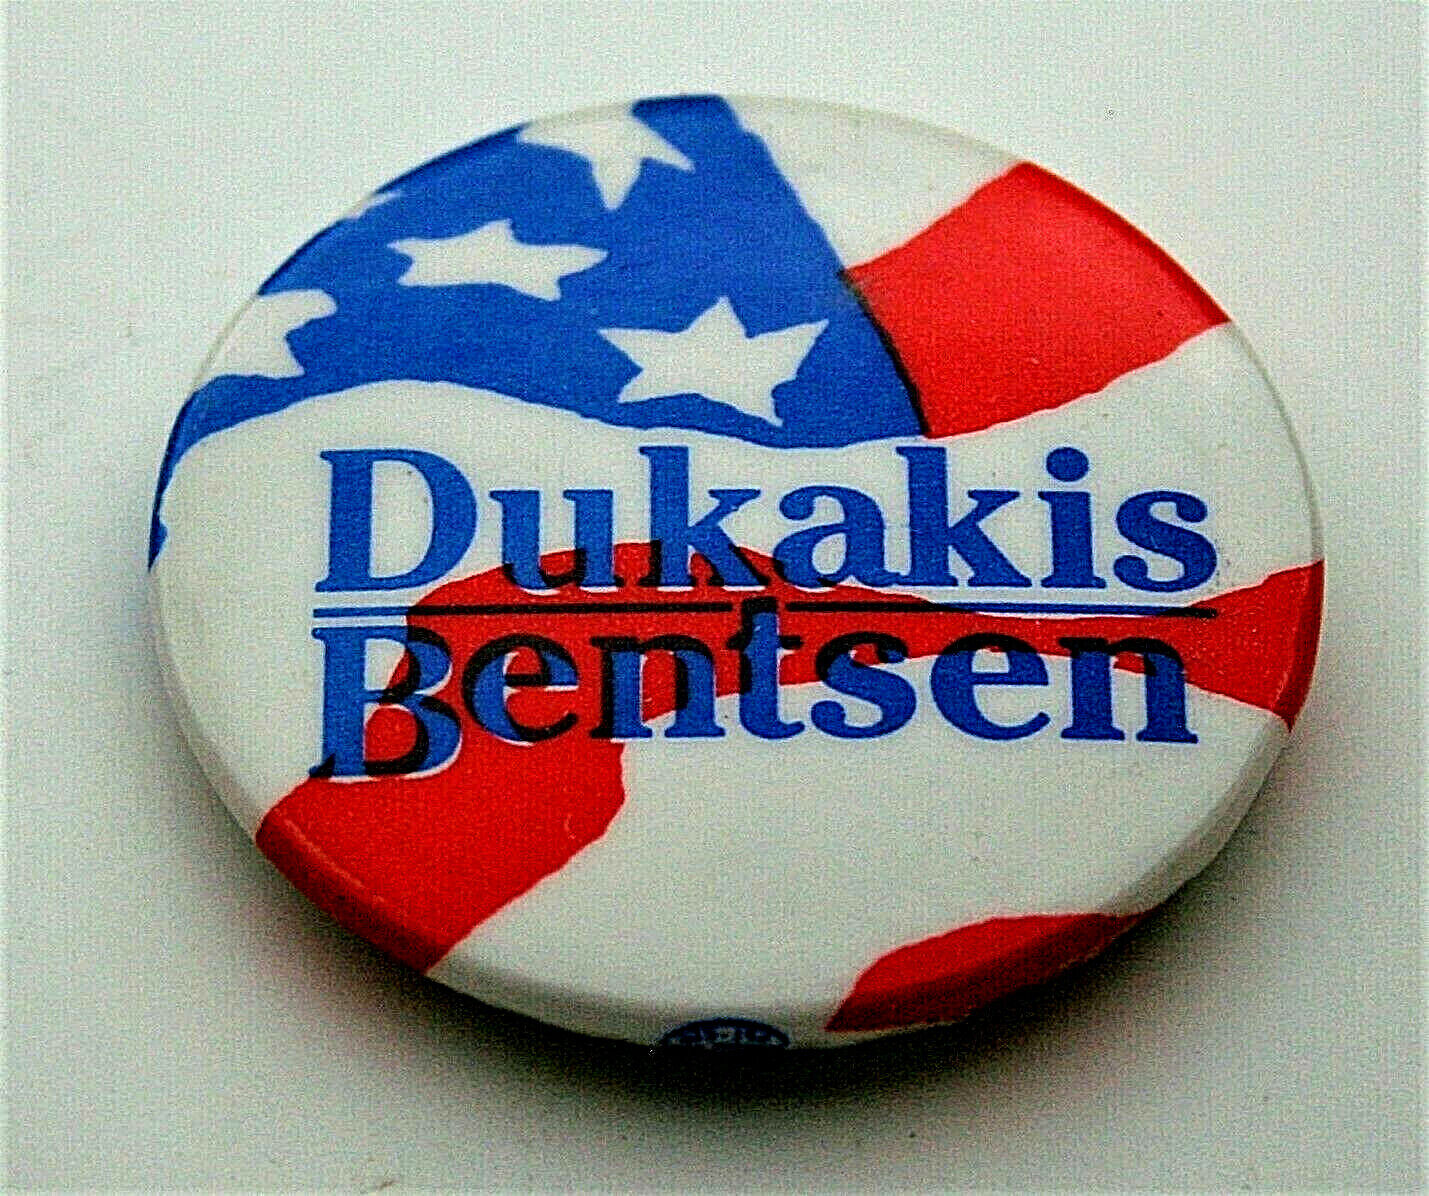 1988 Dukakis Bentsen for President Election Campiagn Button Pin Nice 1.5 inch